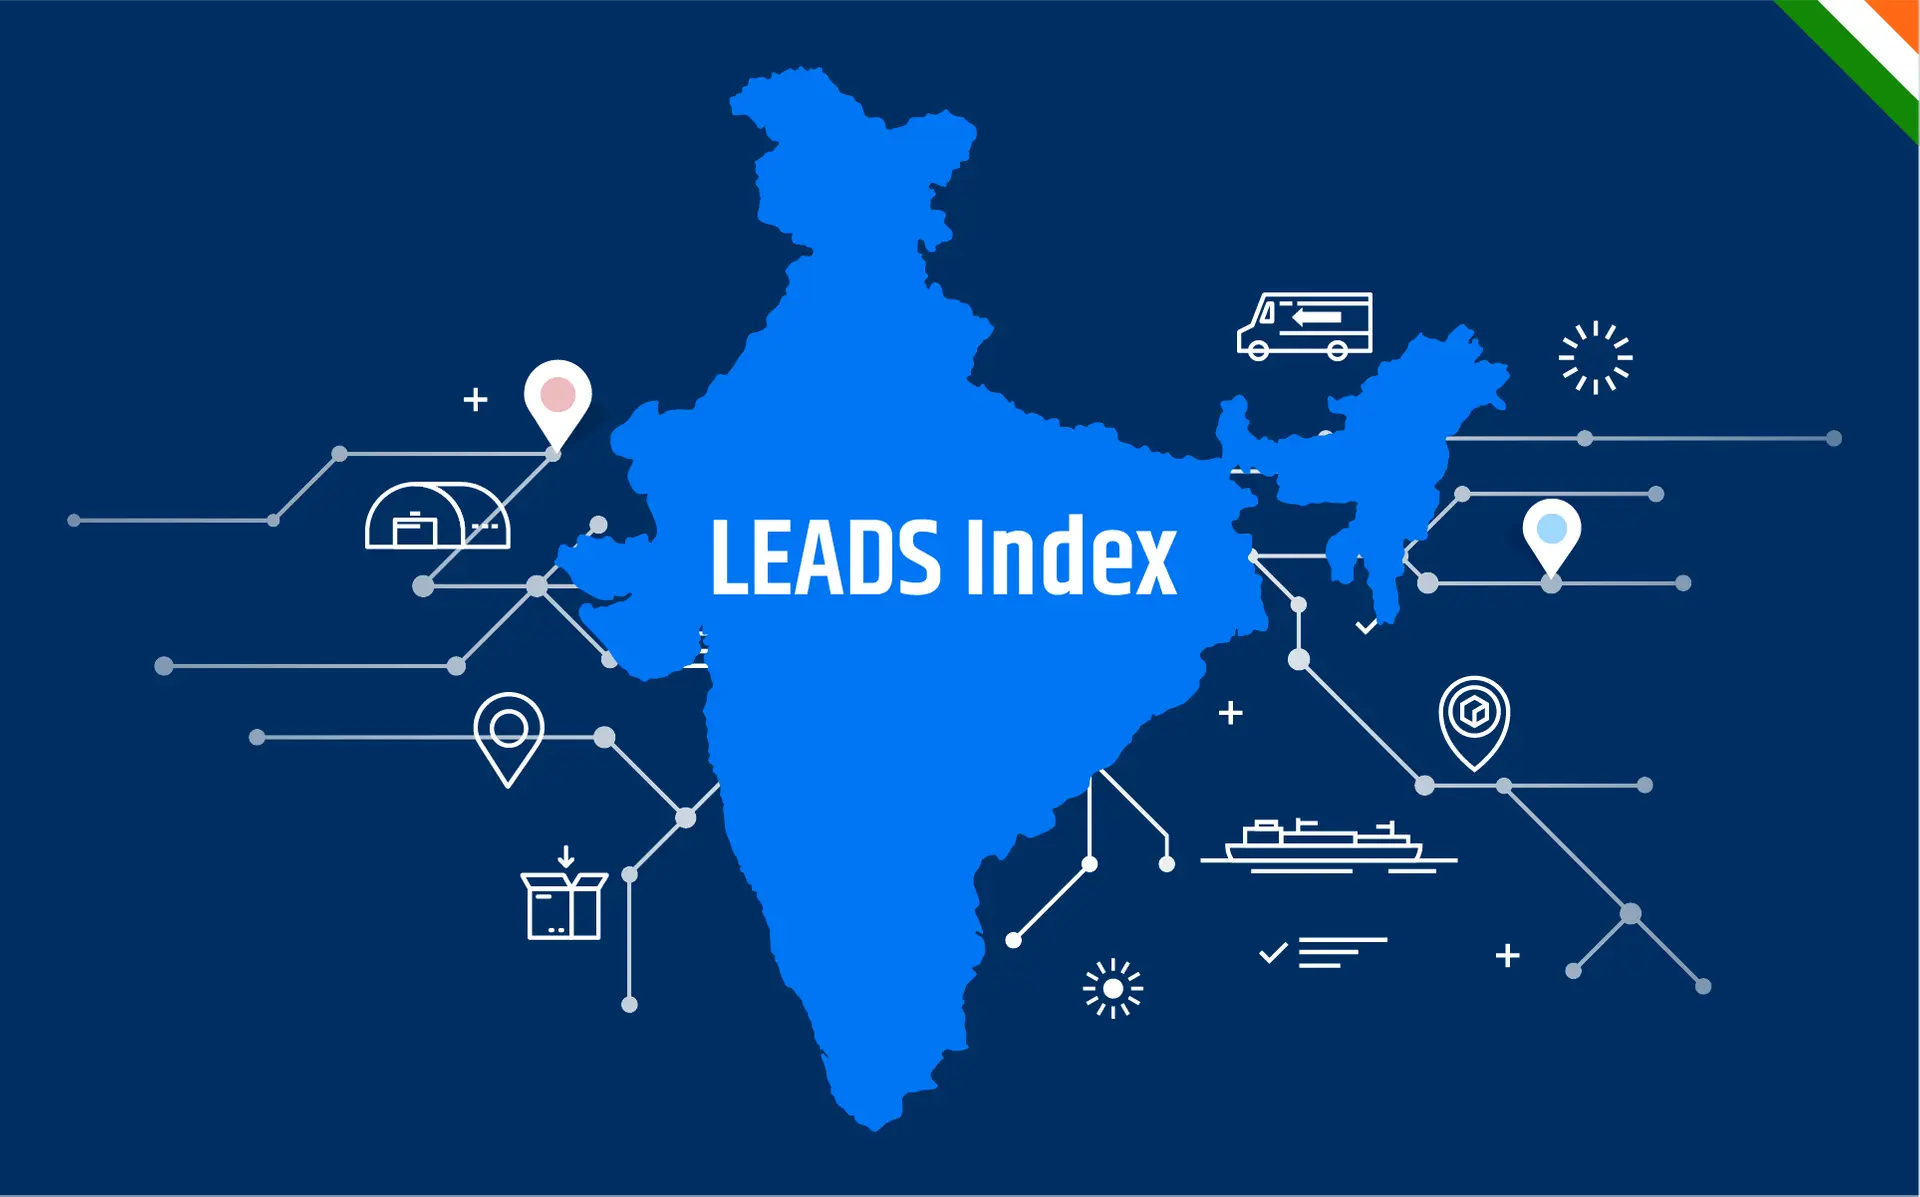 LEADS Index - What is it and what does it mean for Indian trade?